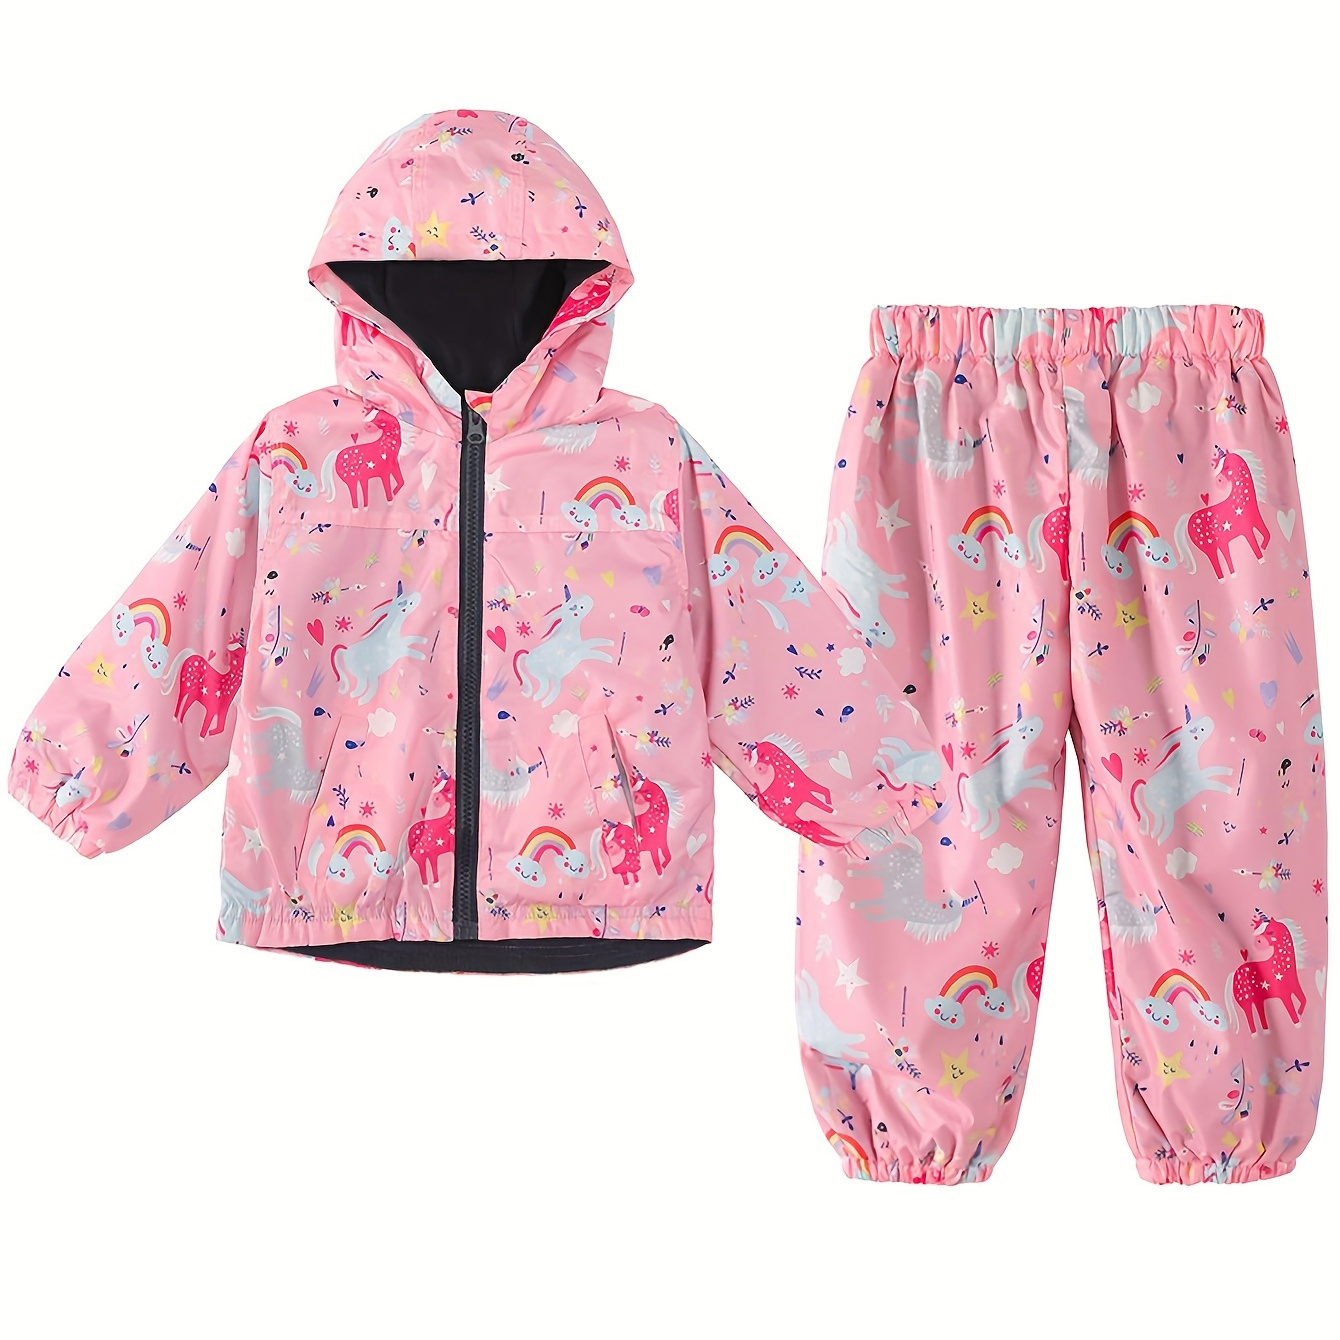 

2pcs Girls Waterproof Hooded Jacket Outerwear + Jogger Pants Set Comfy Cute Outfits Outdoor Gift